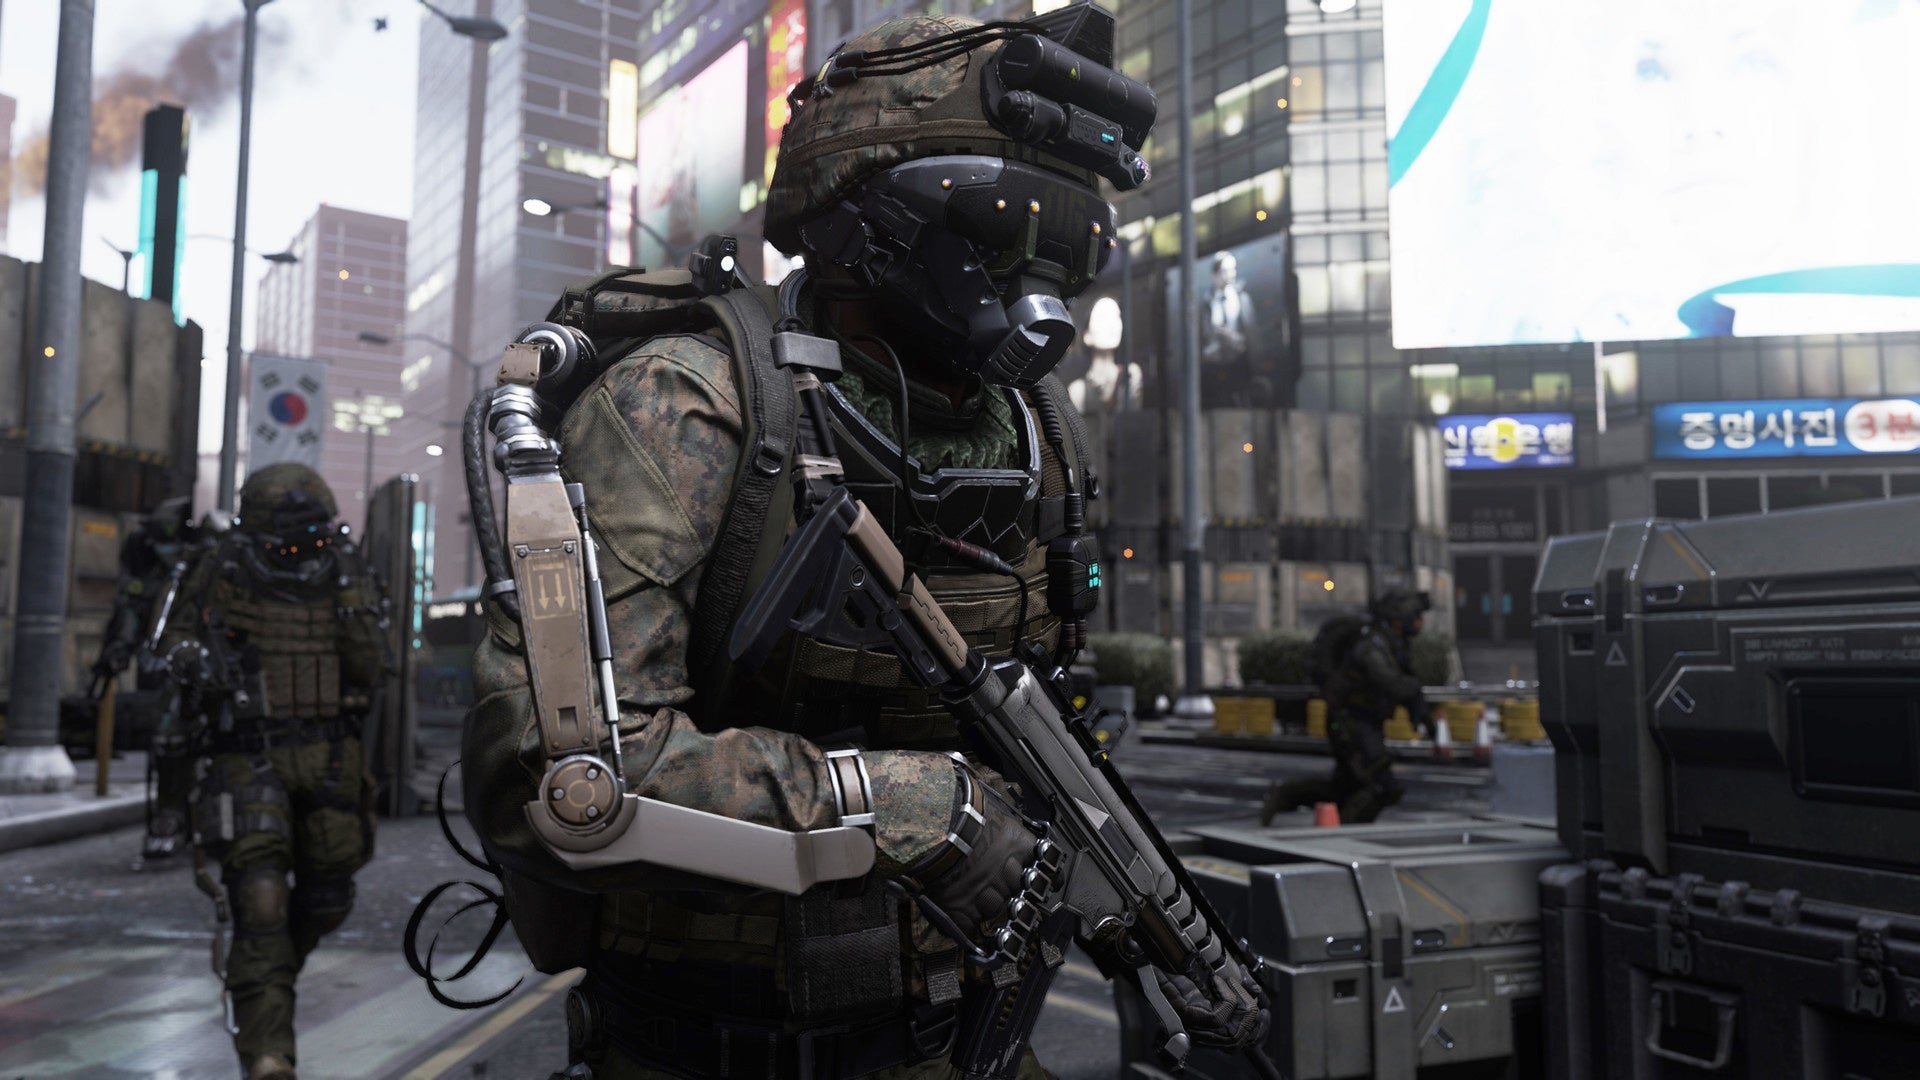 Call Of Duty Advanced Warfare is rumoured to be getting a sequel from developers Sledgehammer Games.